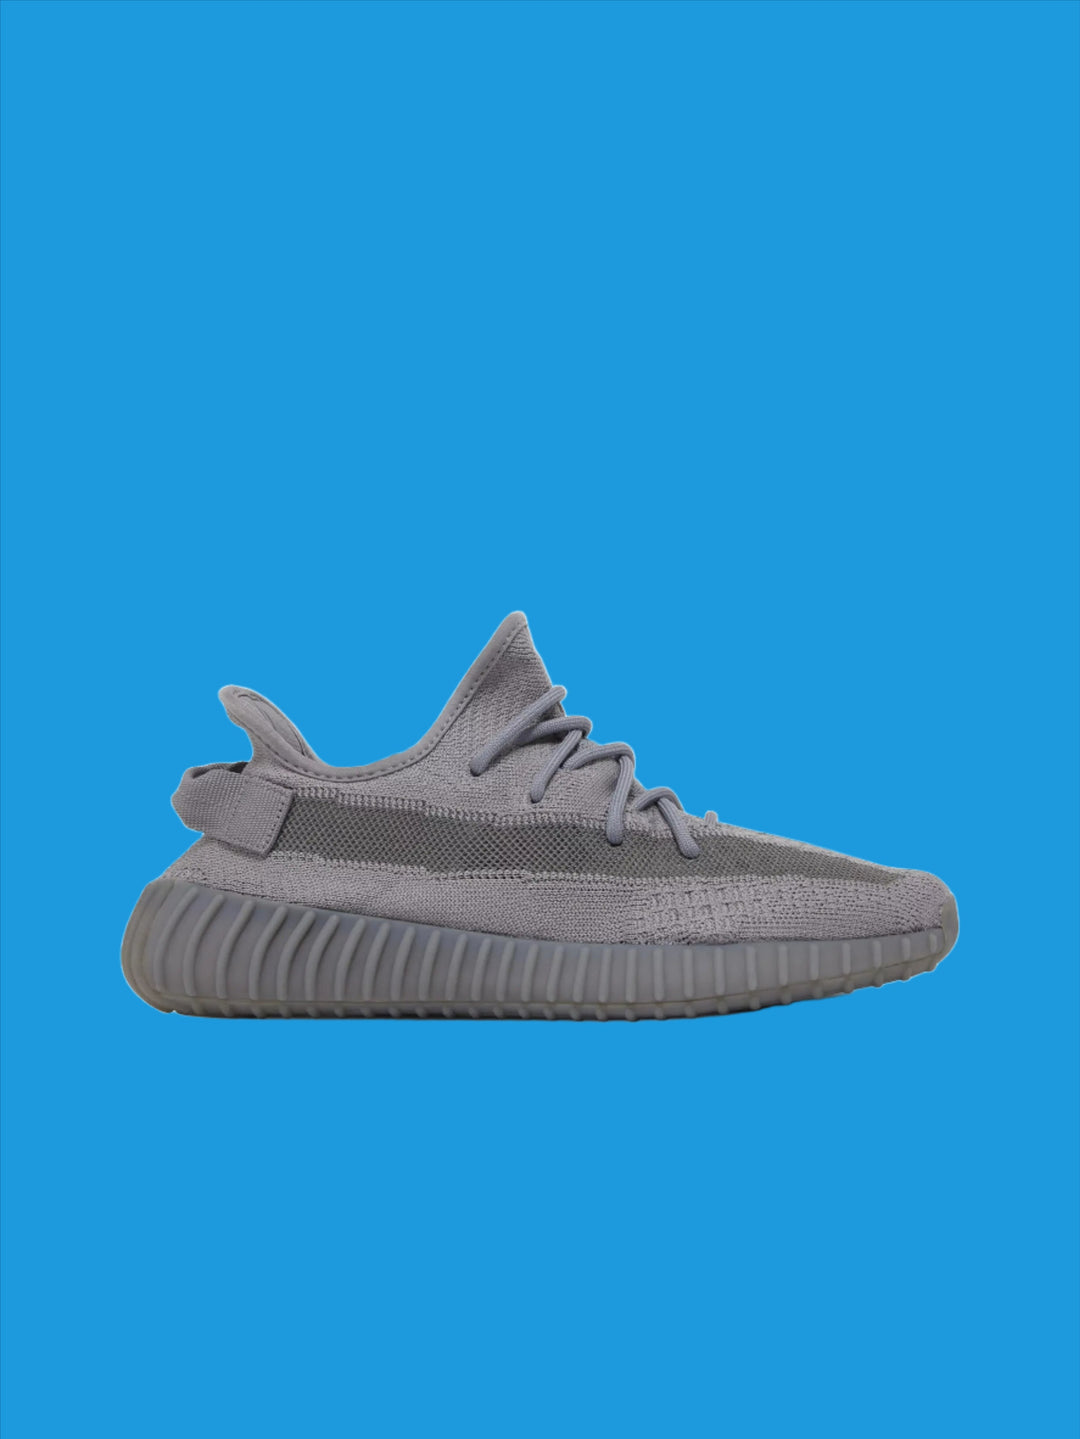 Adidas Yeezy Boost 350 V2 Steel Grey in Auckland, New Zealand - Shop name